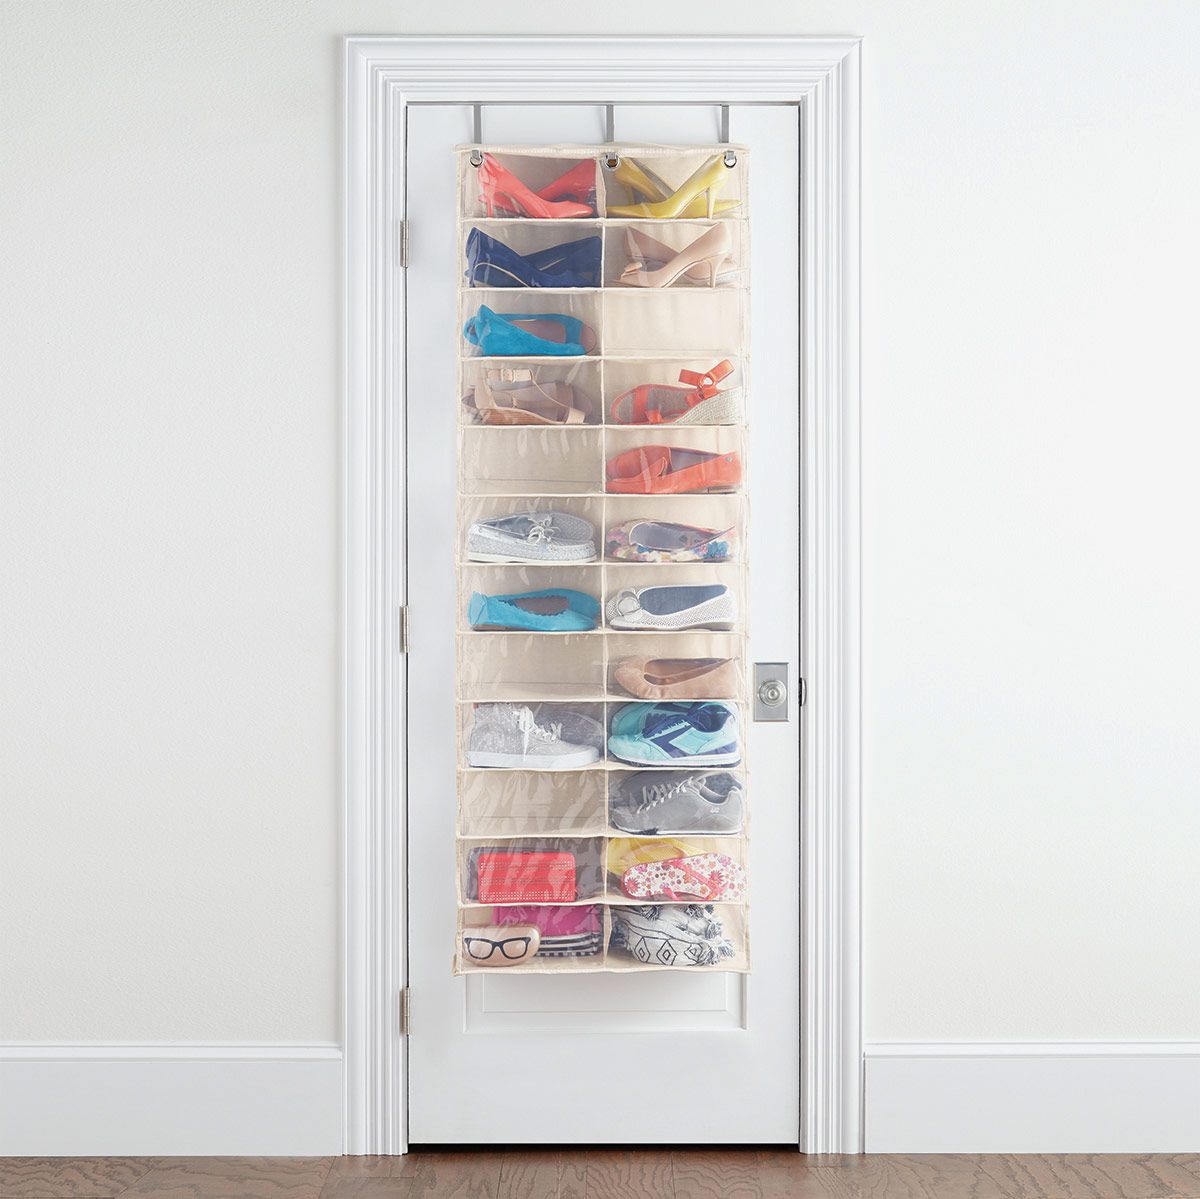 The Container Store 24-Pocket Over the Door Shoe Organizer